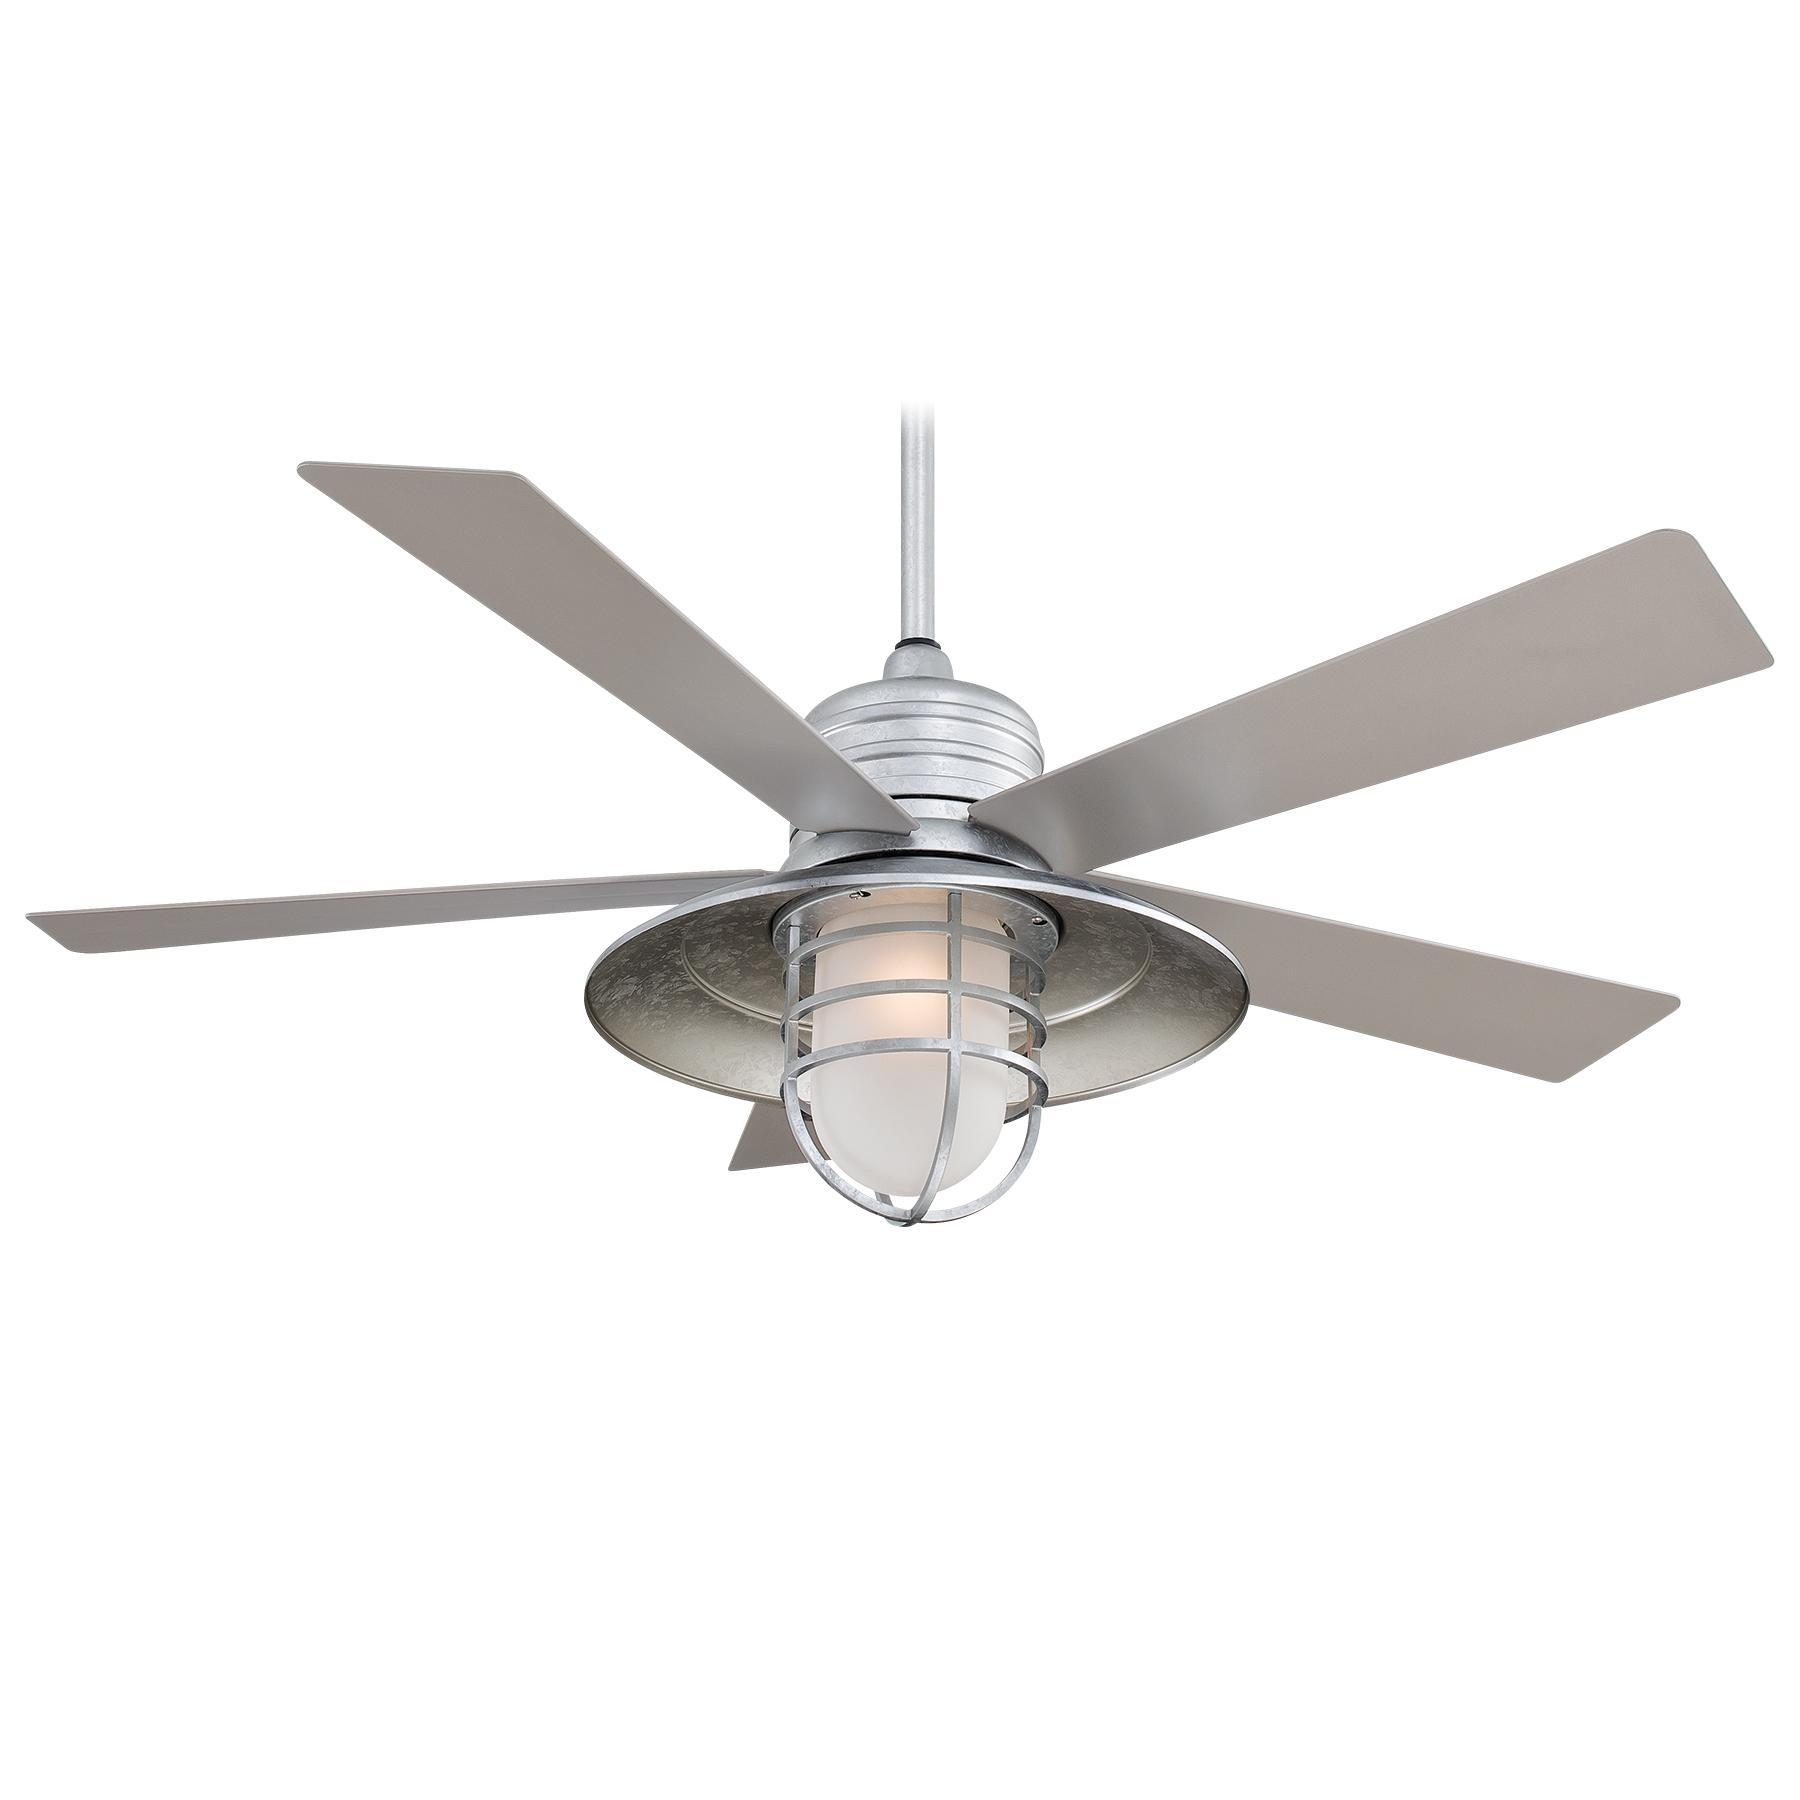 Black Ceiling Fan With Bright Light